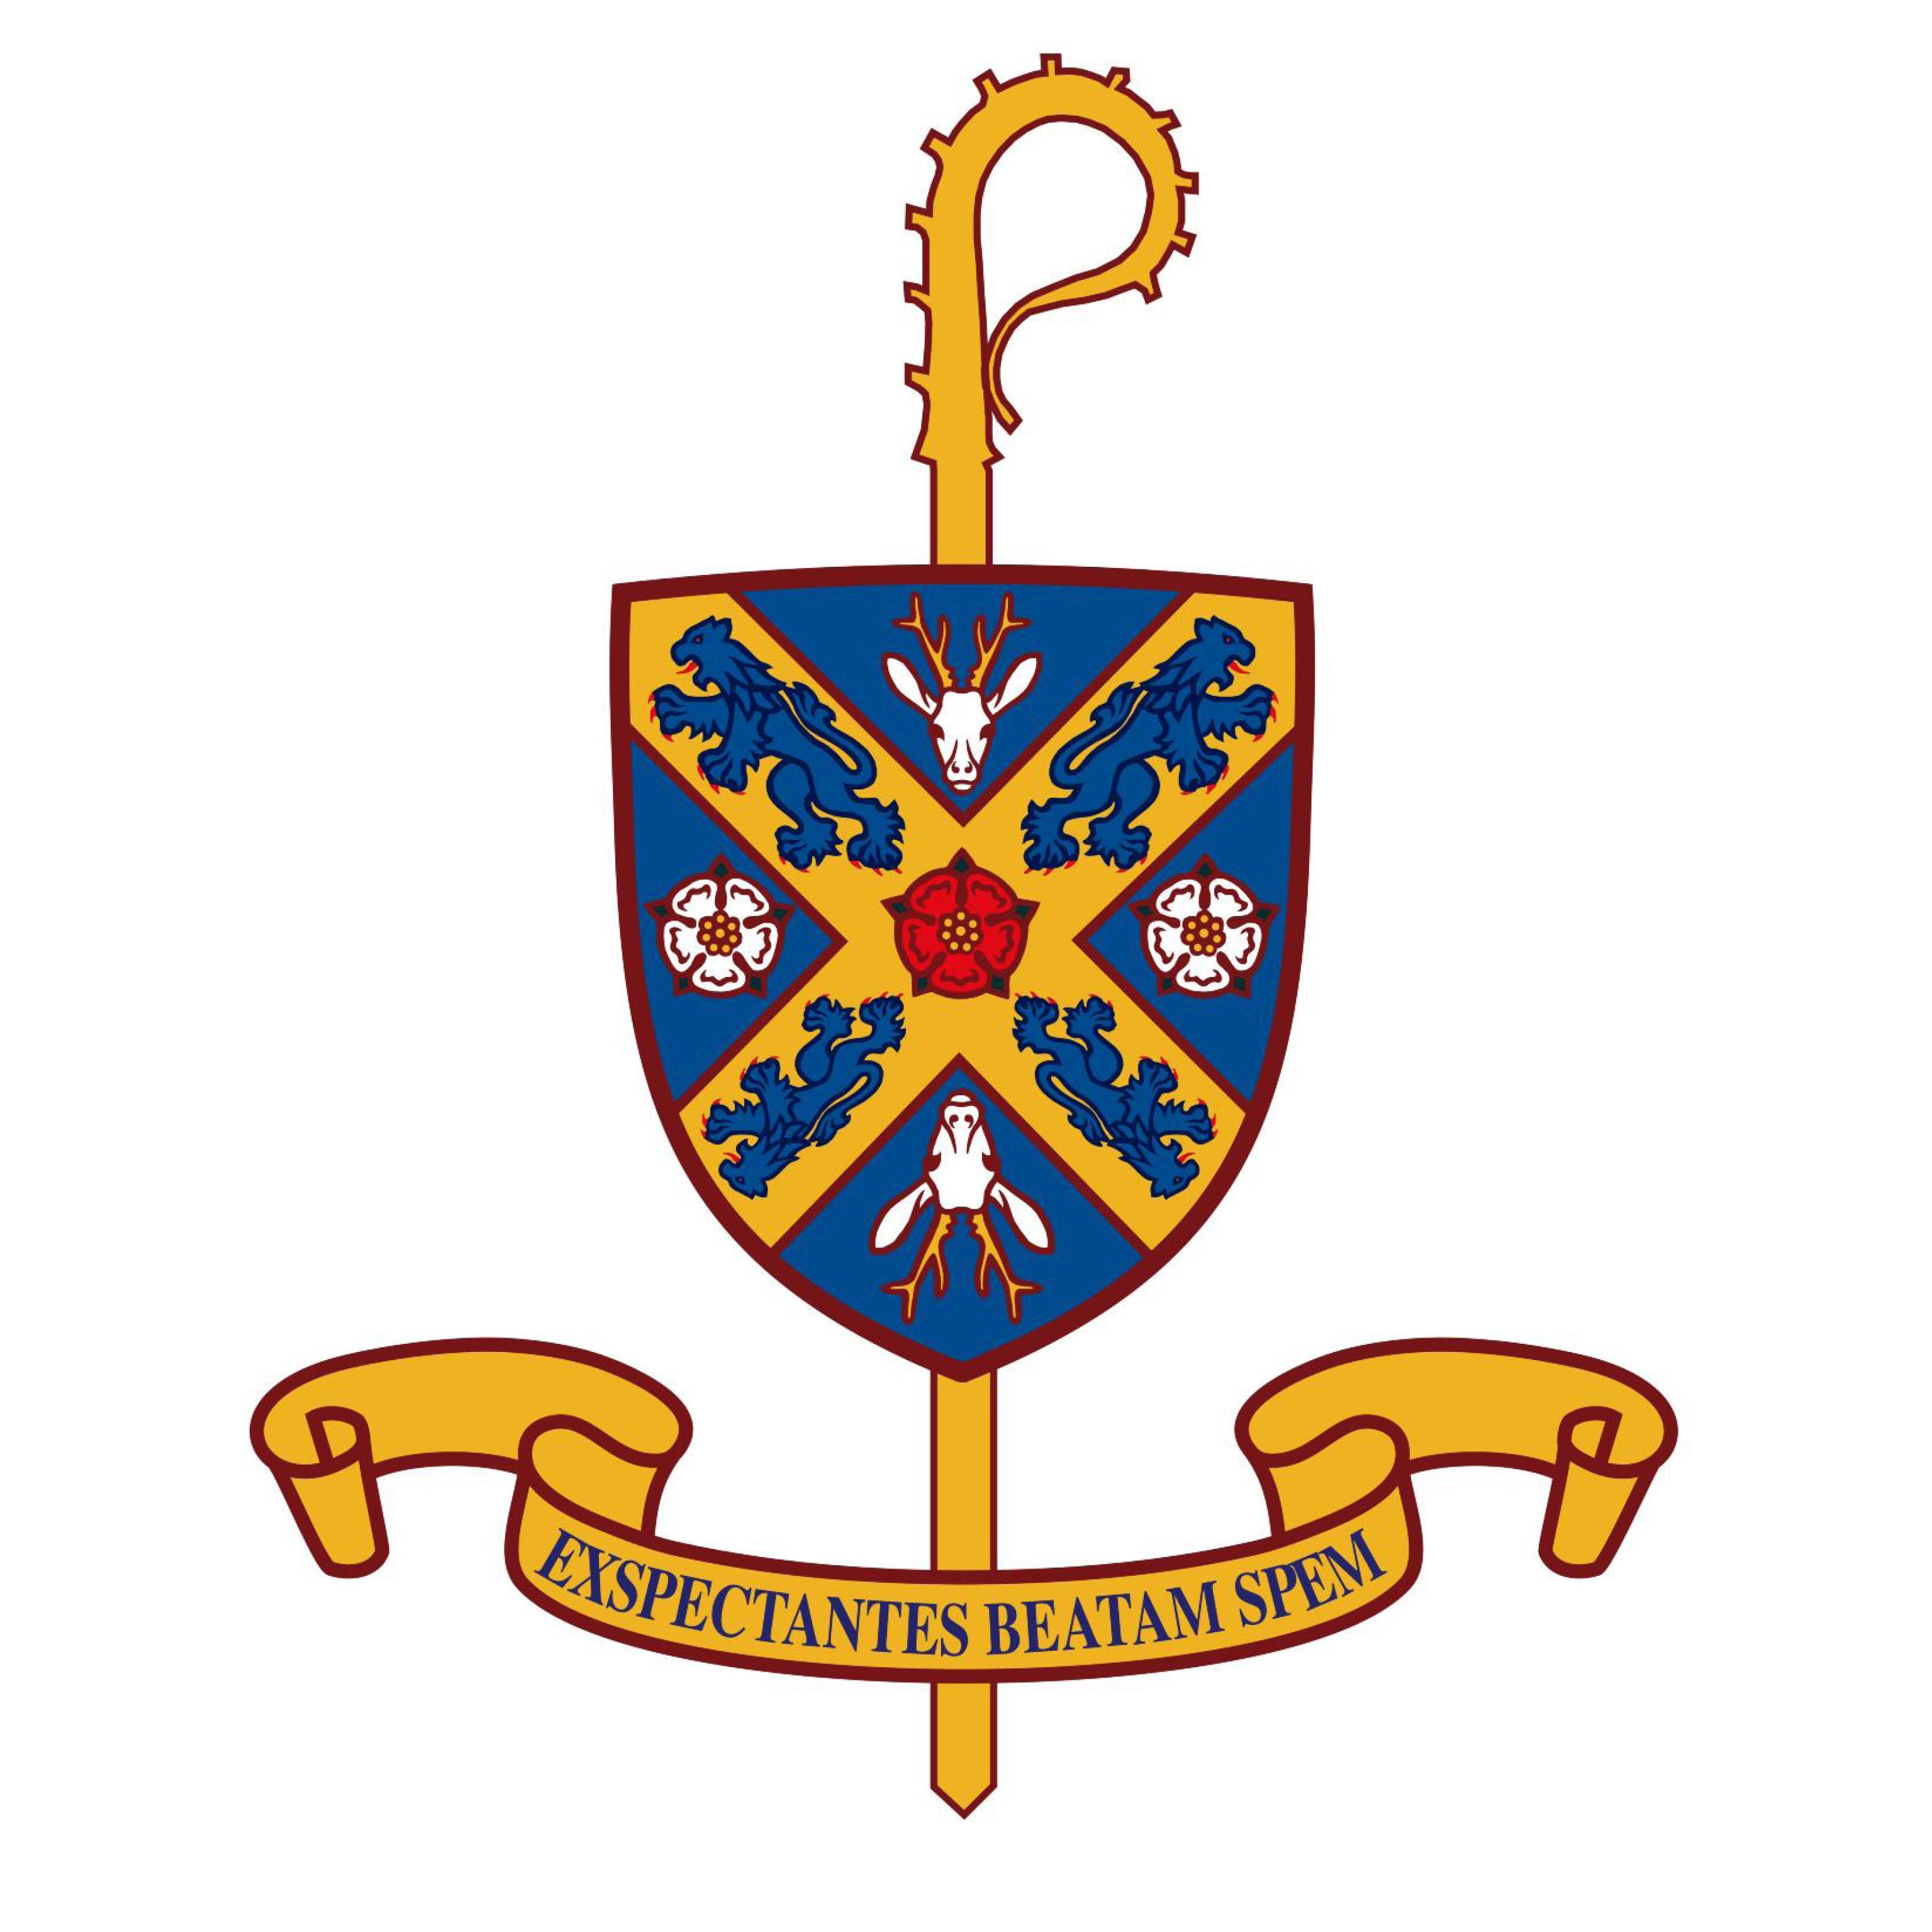 The official Twitter account of the Roman Catholic Diocese of Middlesbrough, England.